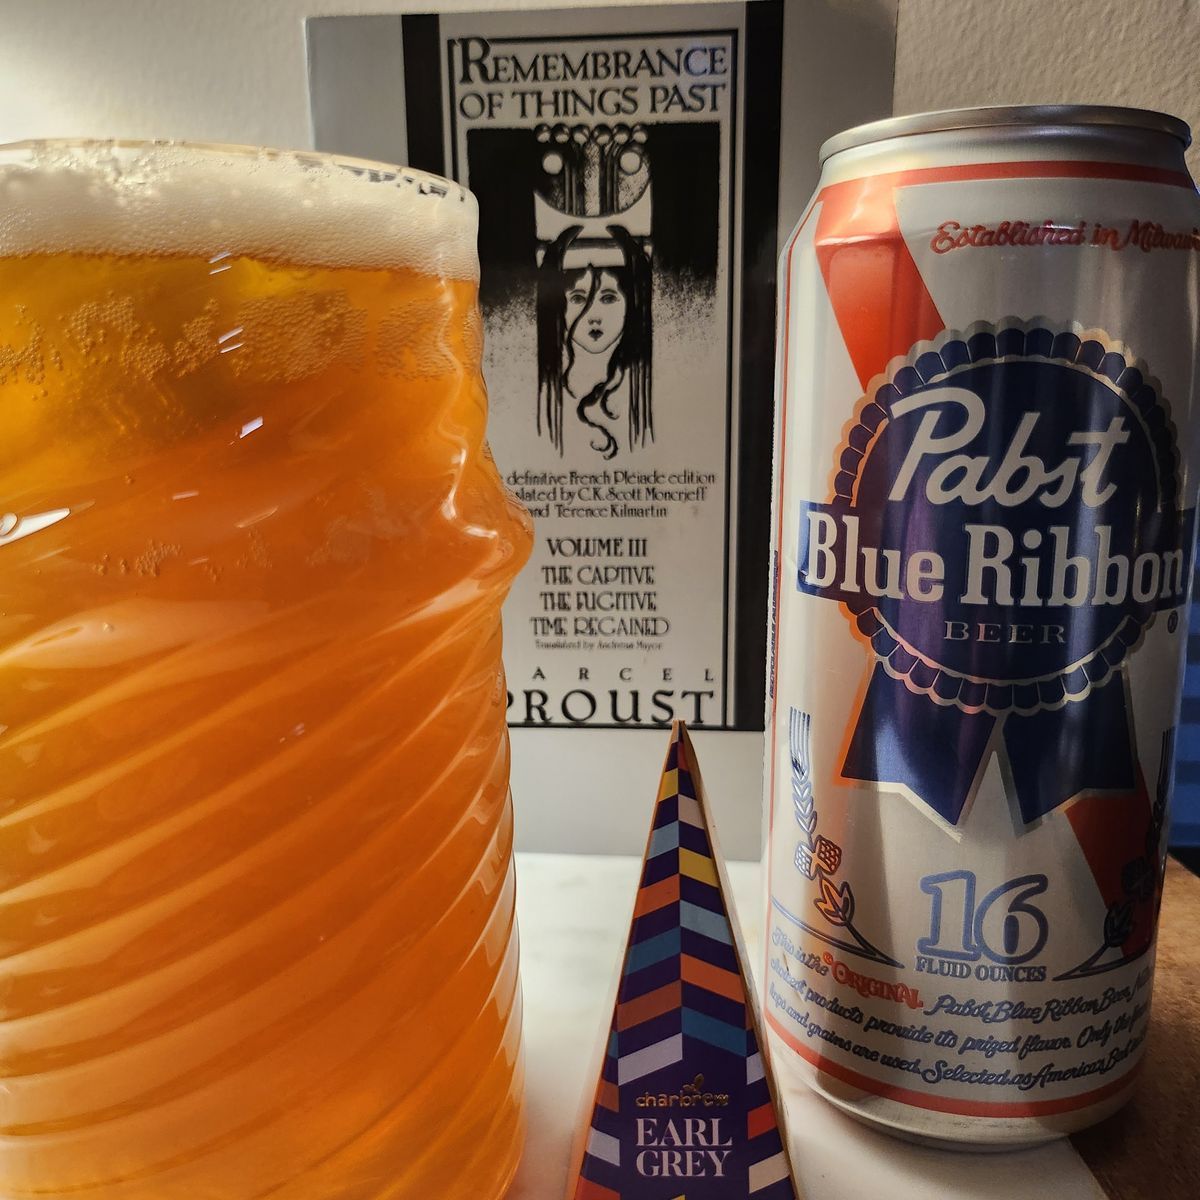 A lovely shandy made with PBR and Earl Grey Tea. Delightfully refreshing, perfect for starting the workweek off on a lighter note. Cheers!